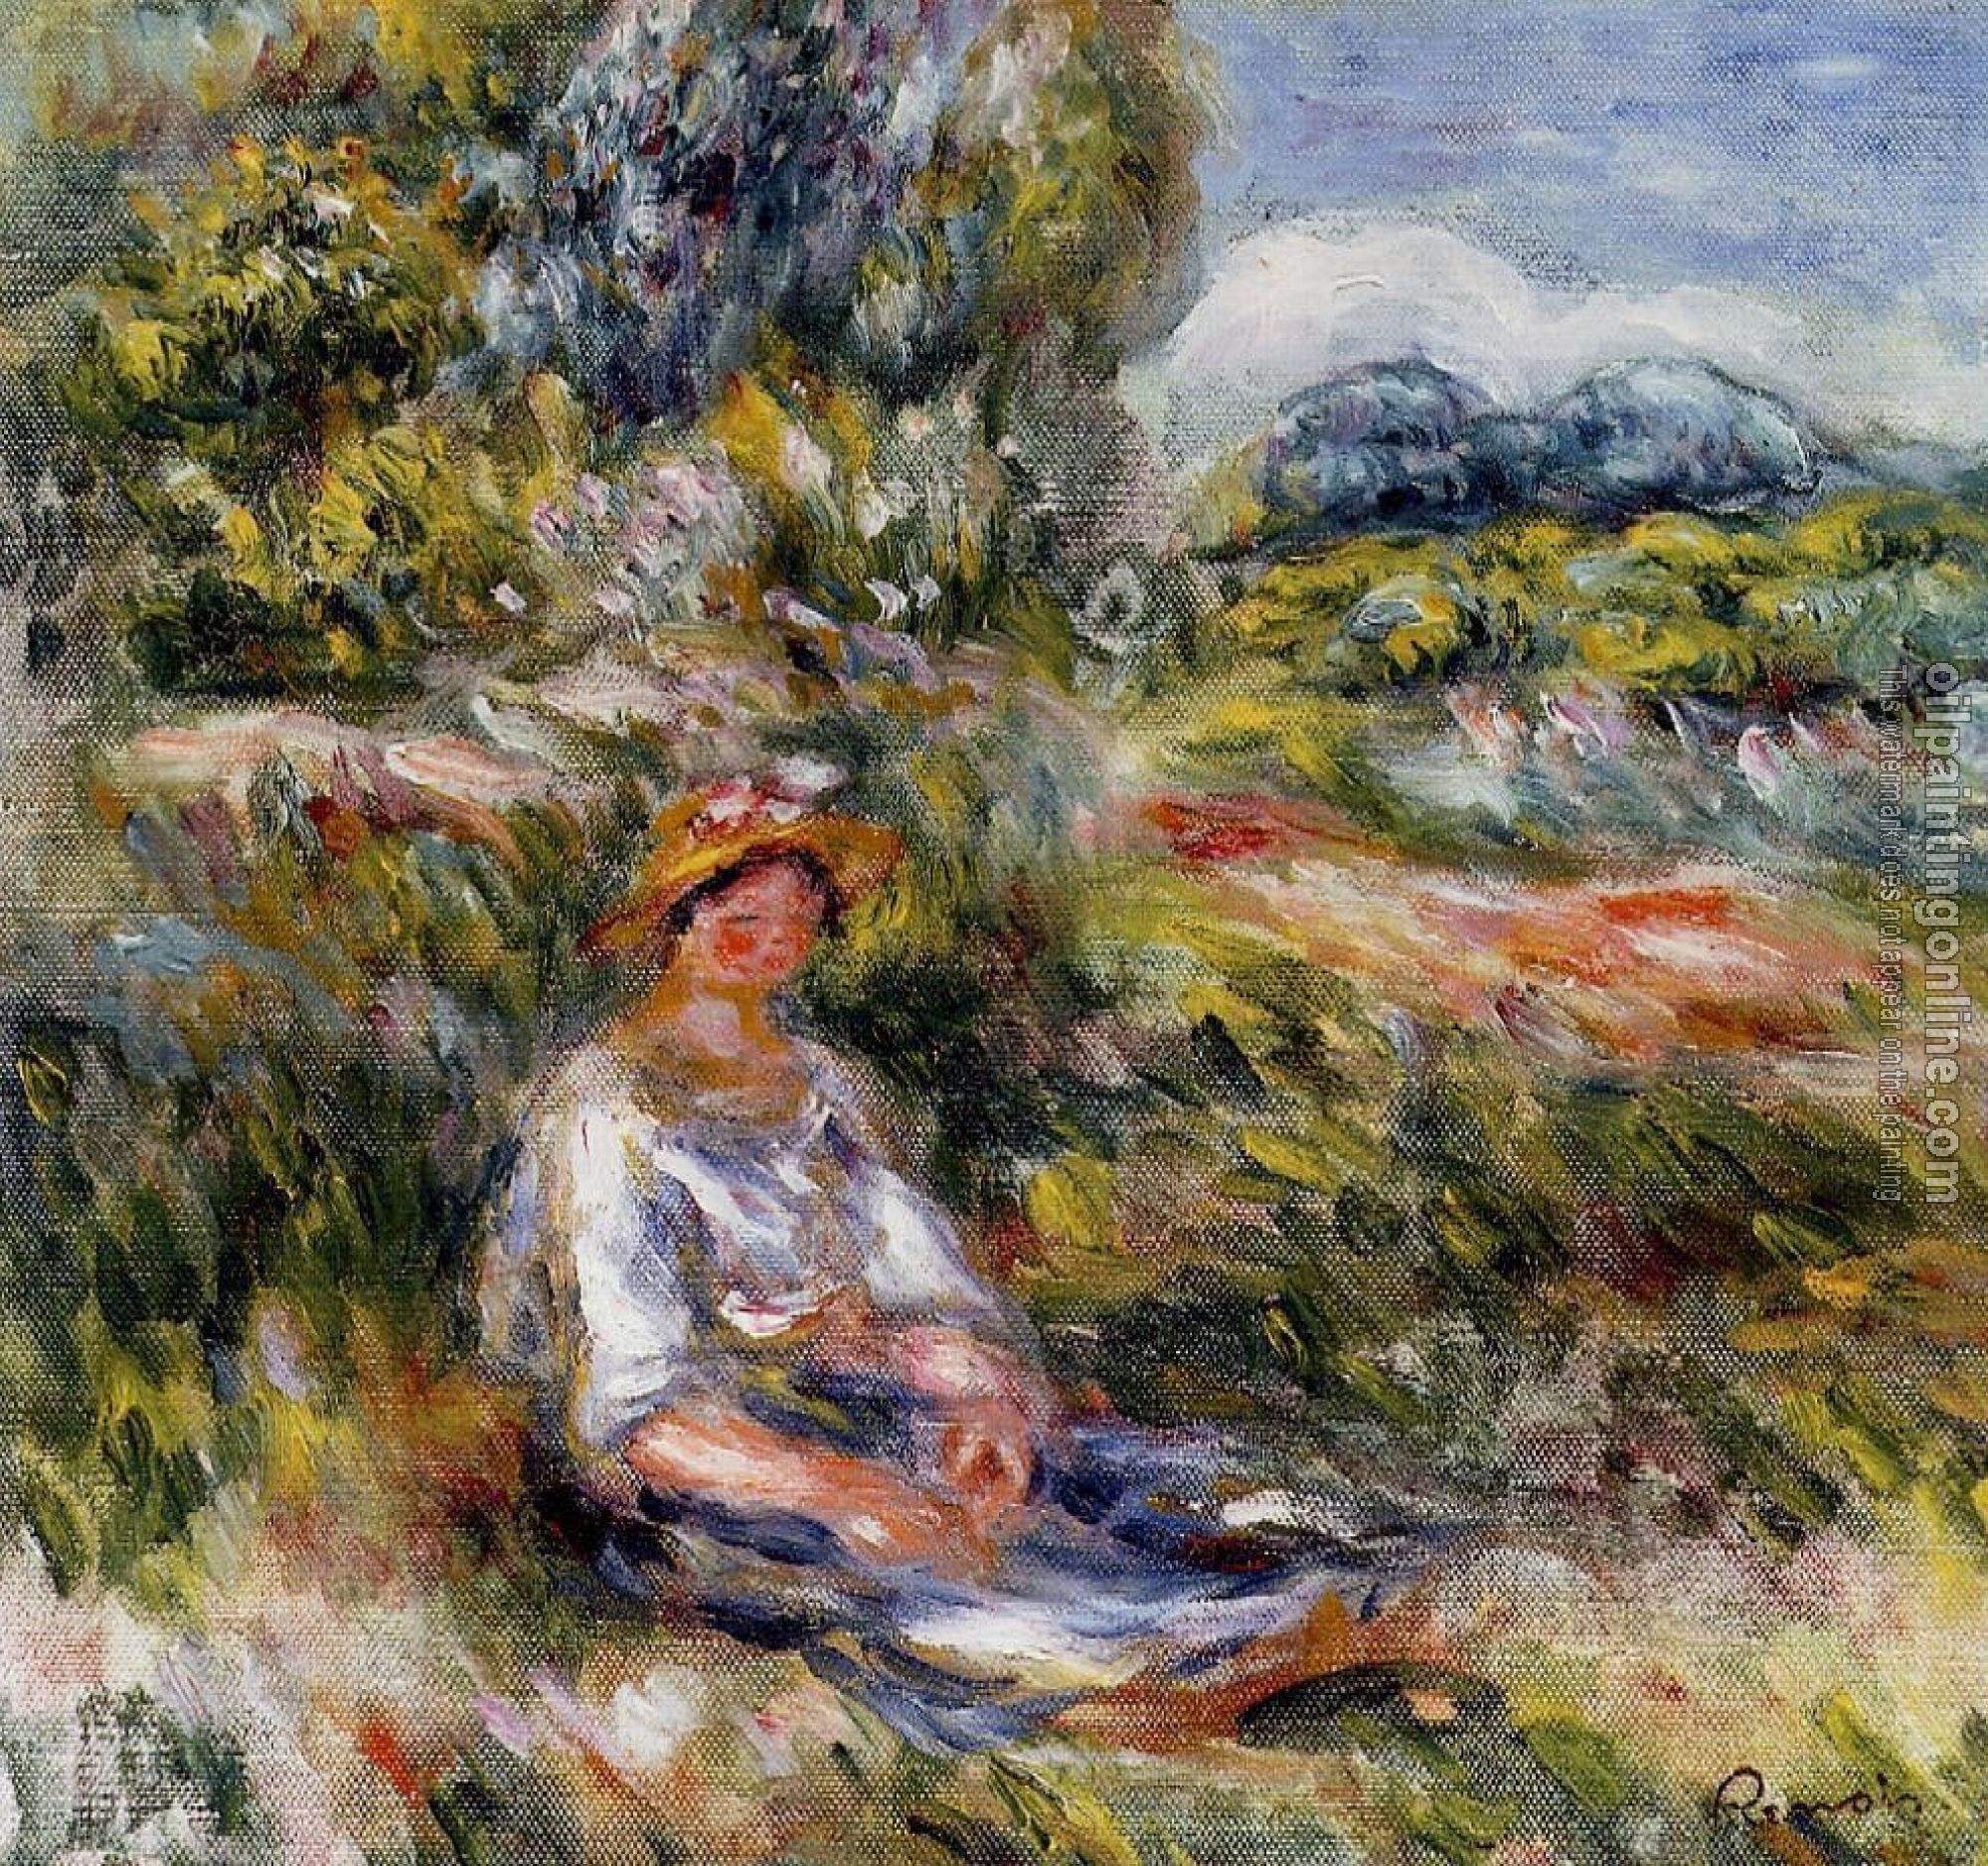 Renoir, Pierre Auguste - Young Girl Seated in a Meadow